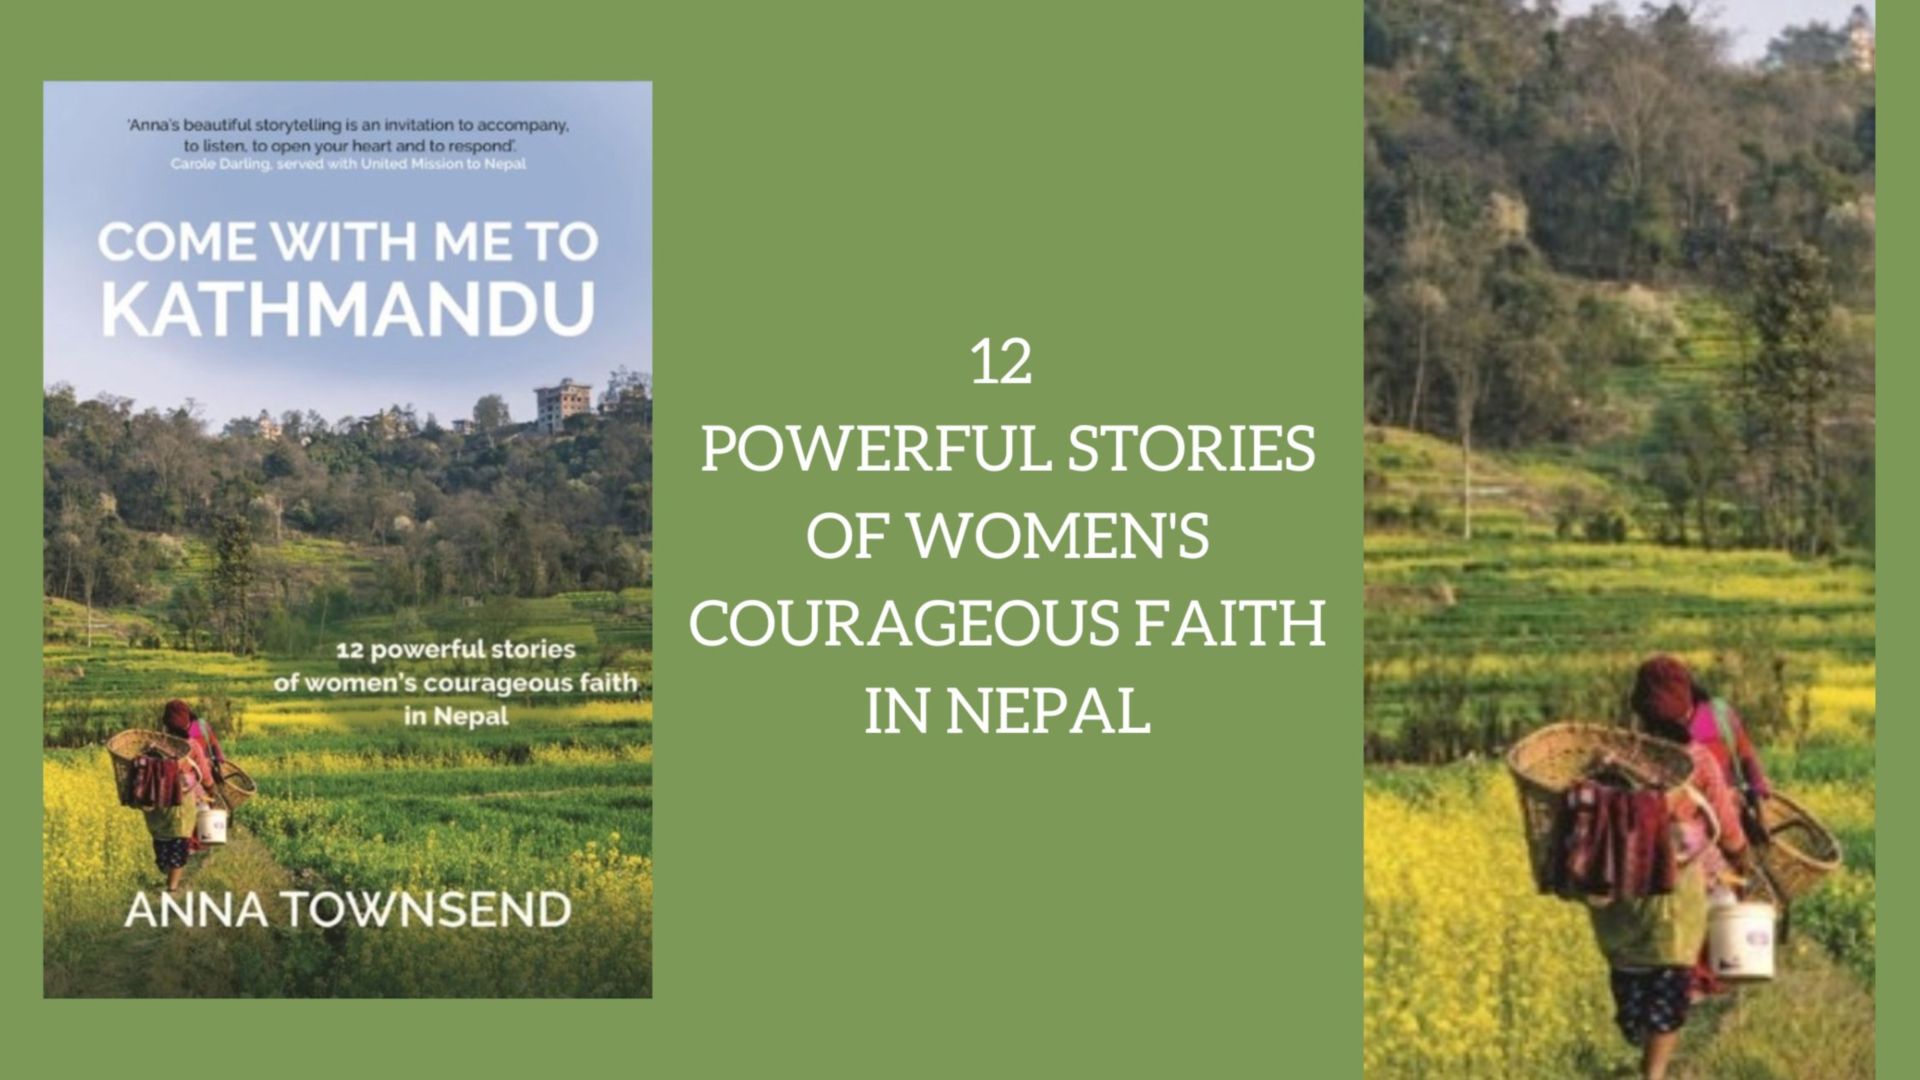 Interview with Anna Townsend, author of 'Come with Me to Kathmandu'